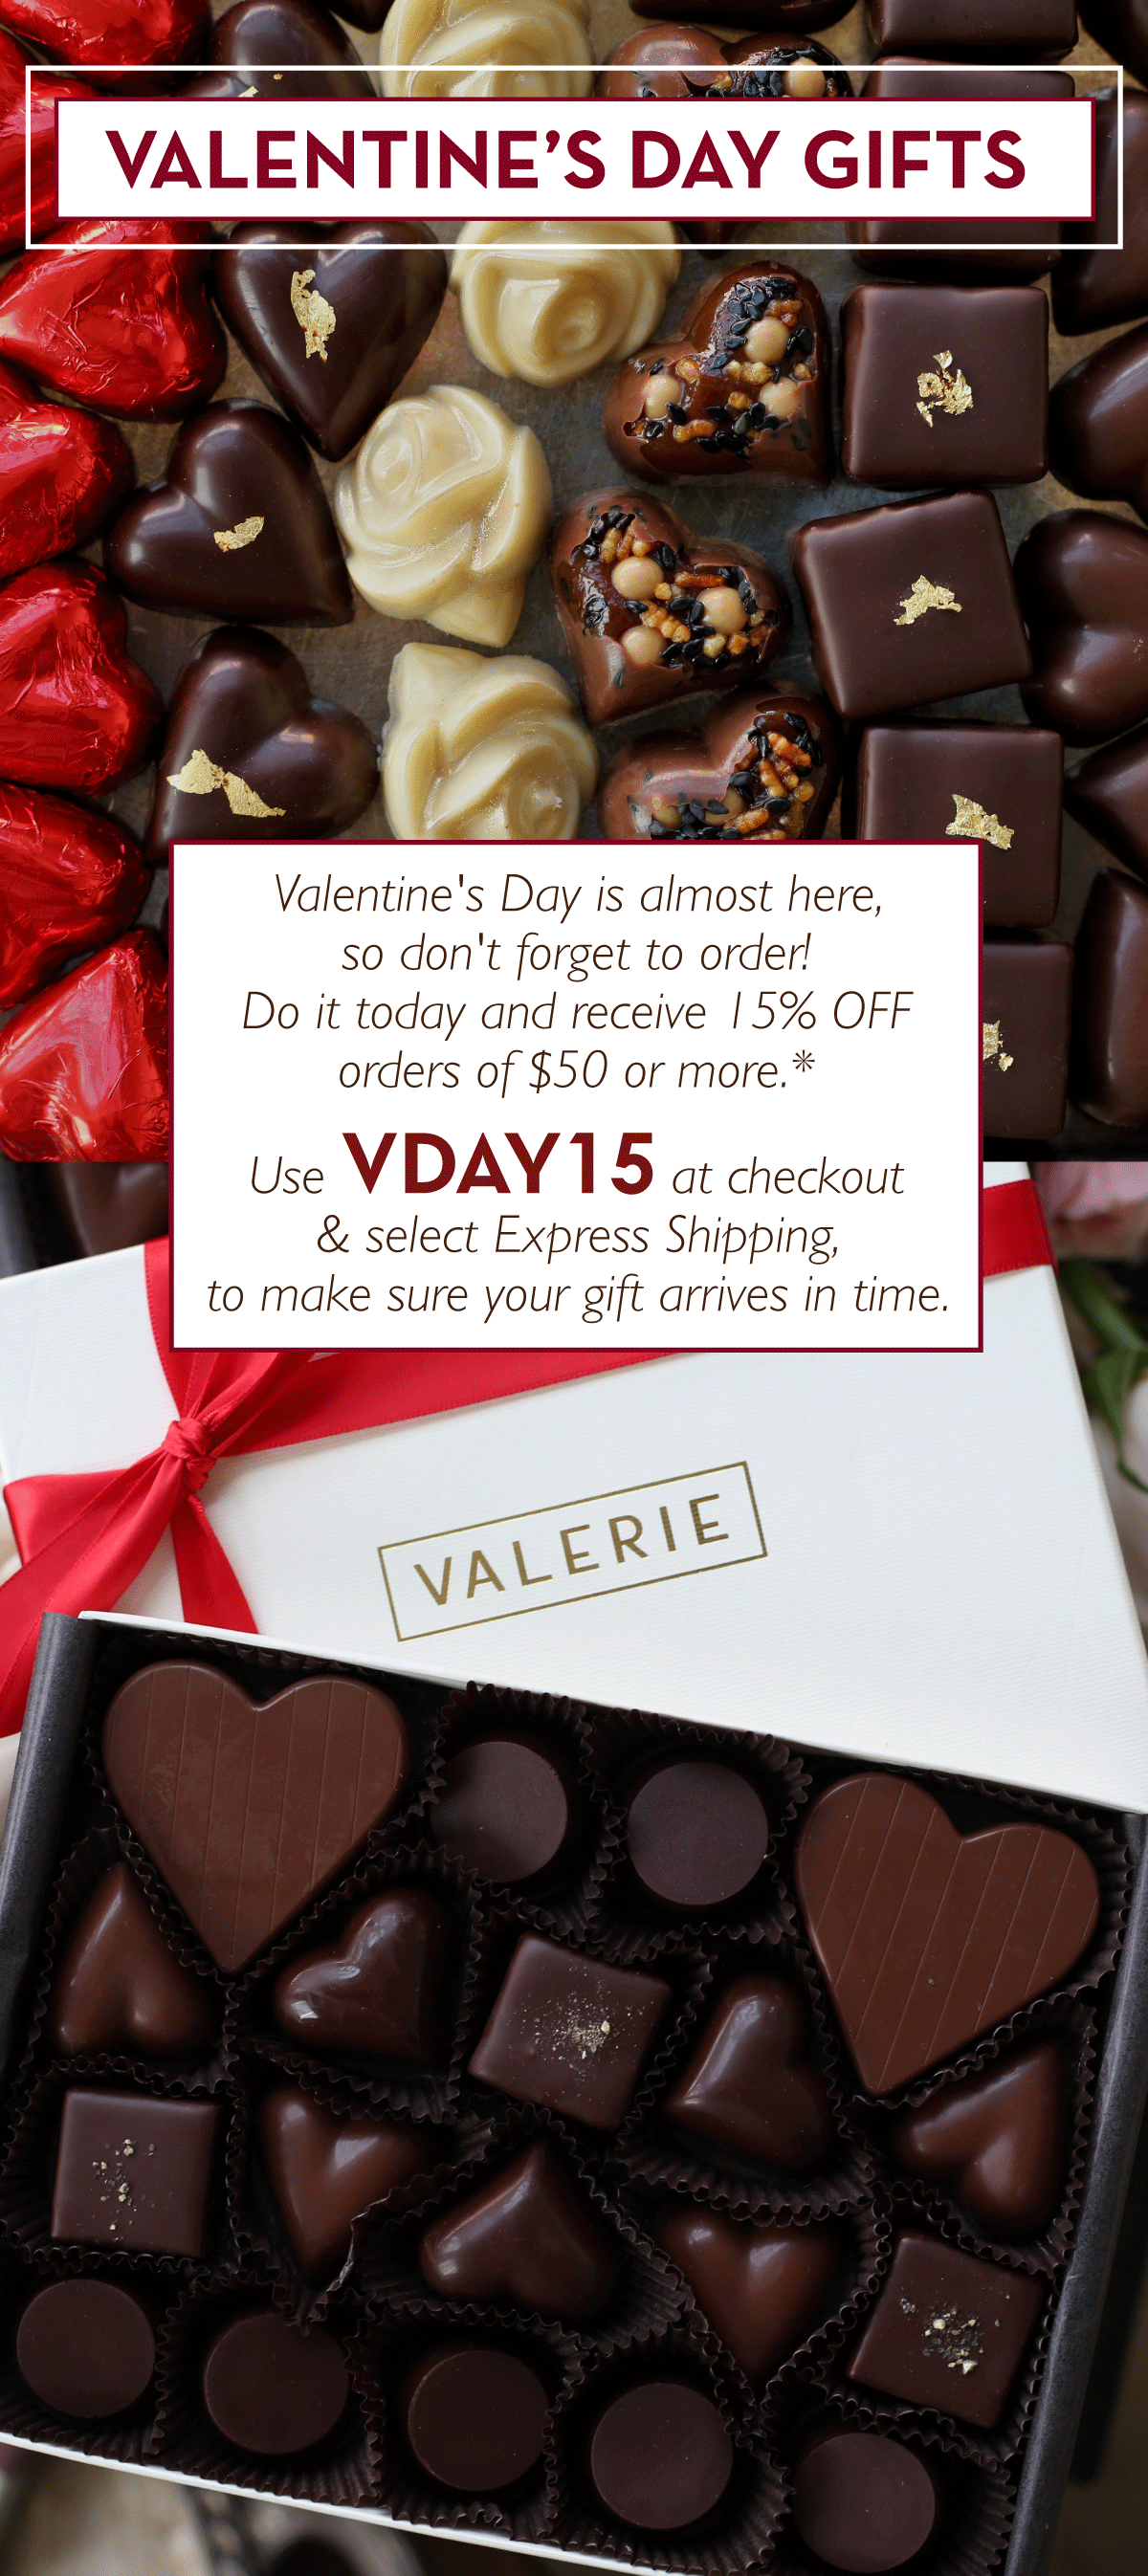 Valentine's Day is almost here, so don't forget to order! Do it today and receive 15% OFF orders of $50 or more.* Use VDAY15 at checkout & select Express Shipping, to make sure your gift arrives in time.